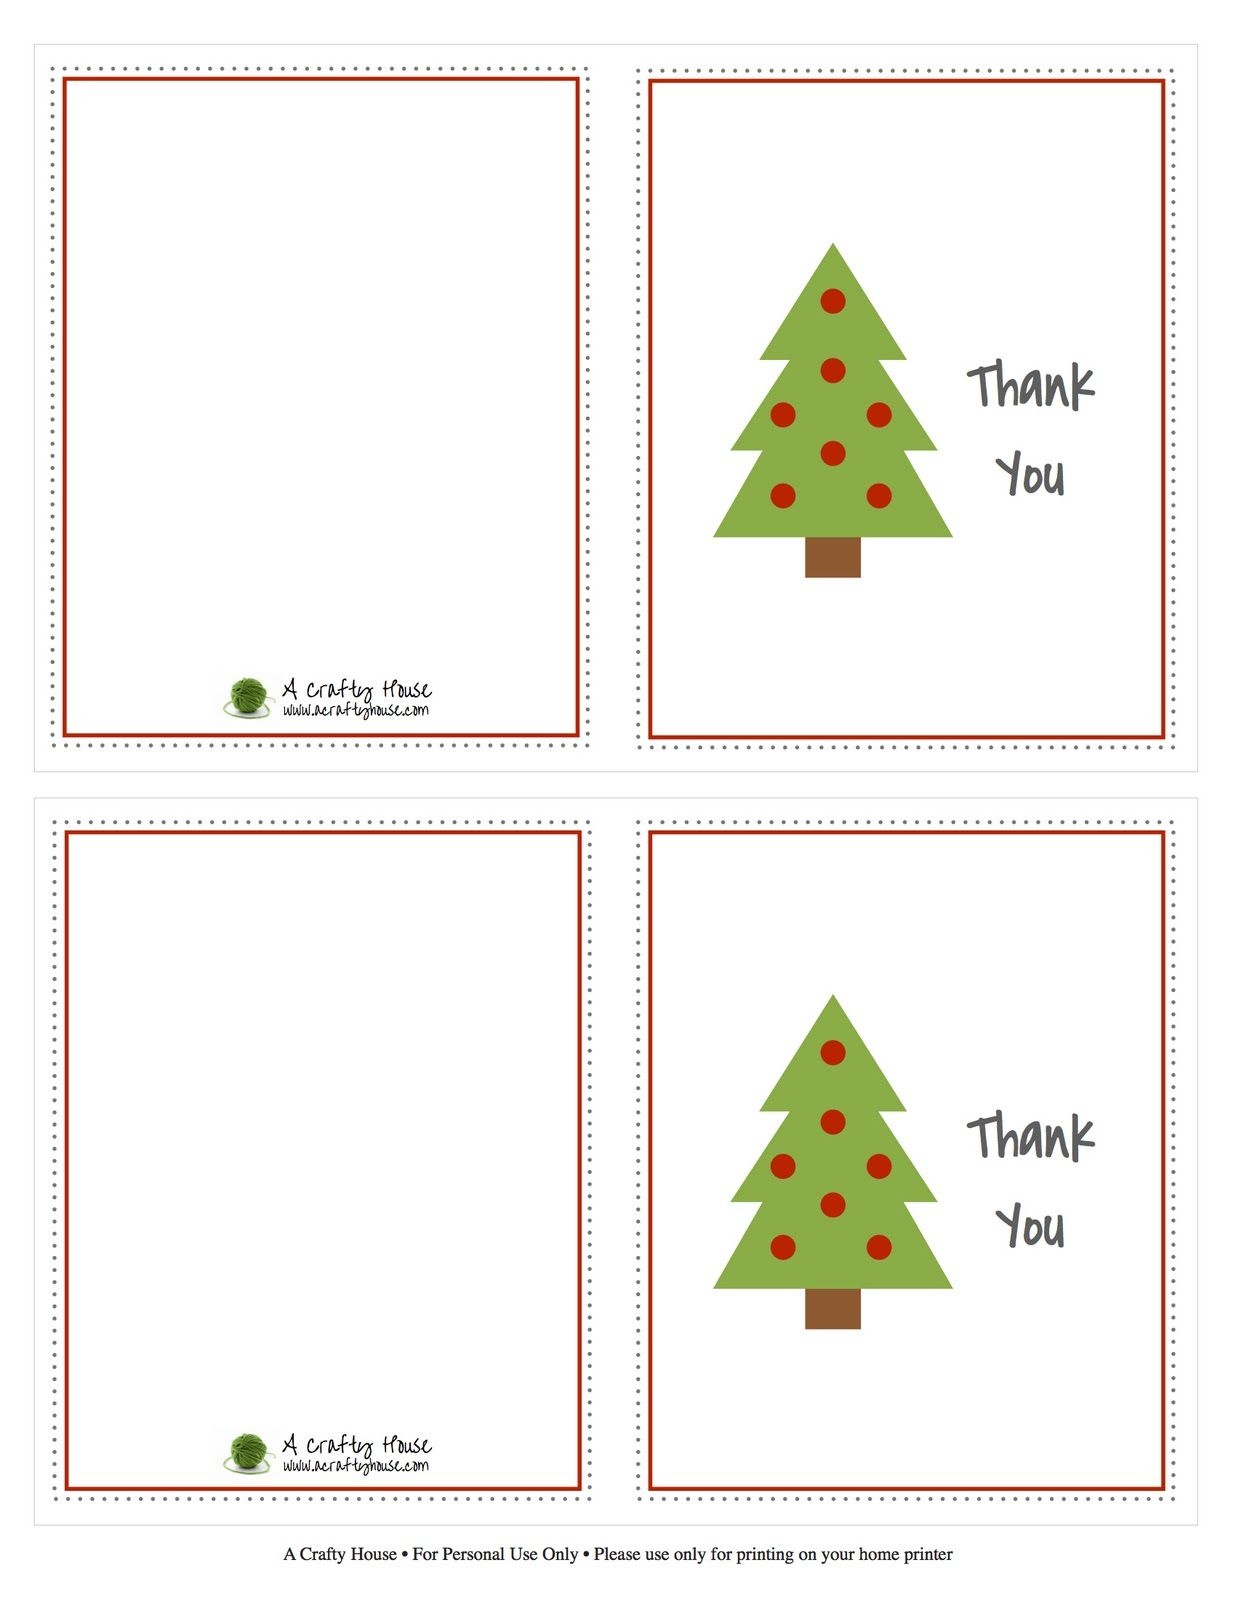 Free Printable Christmas Card Thank You Note | A Crafty House - Christmas Thank You Cards Printable Free